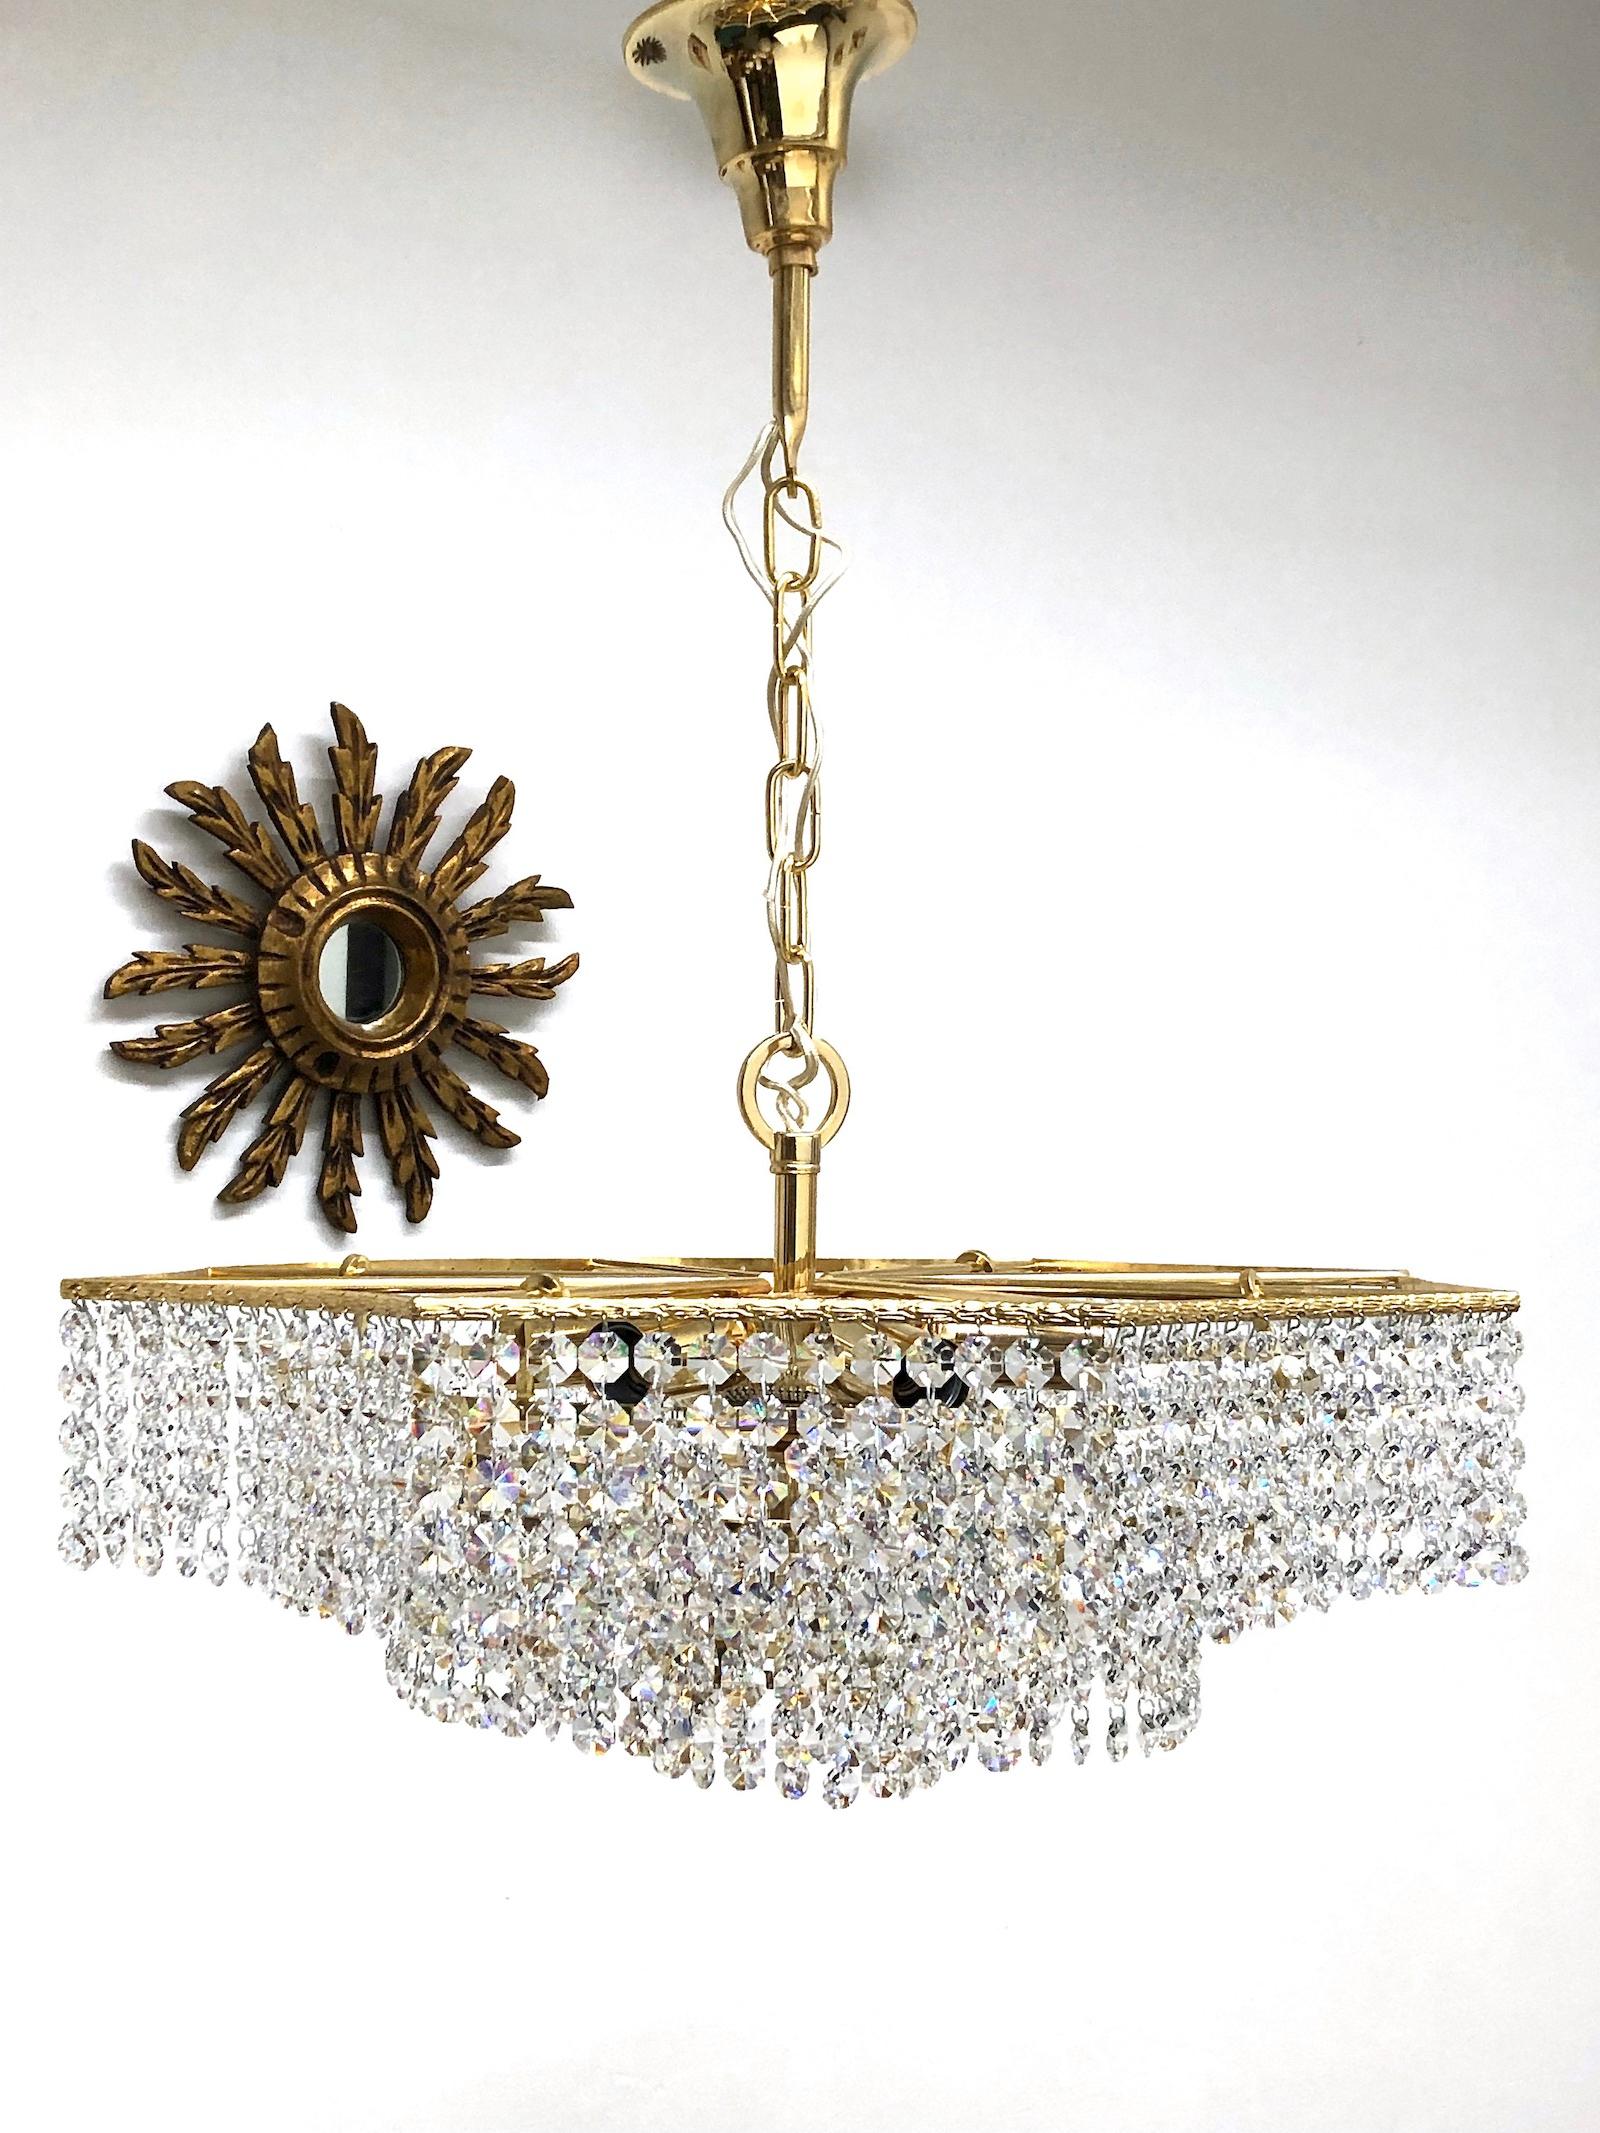 Hollywood Regency Brass and Crystal Glass Waterfall Chandelier, Richard Essig, Germany, 1960s For Sale